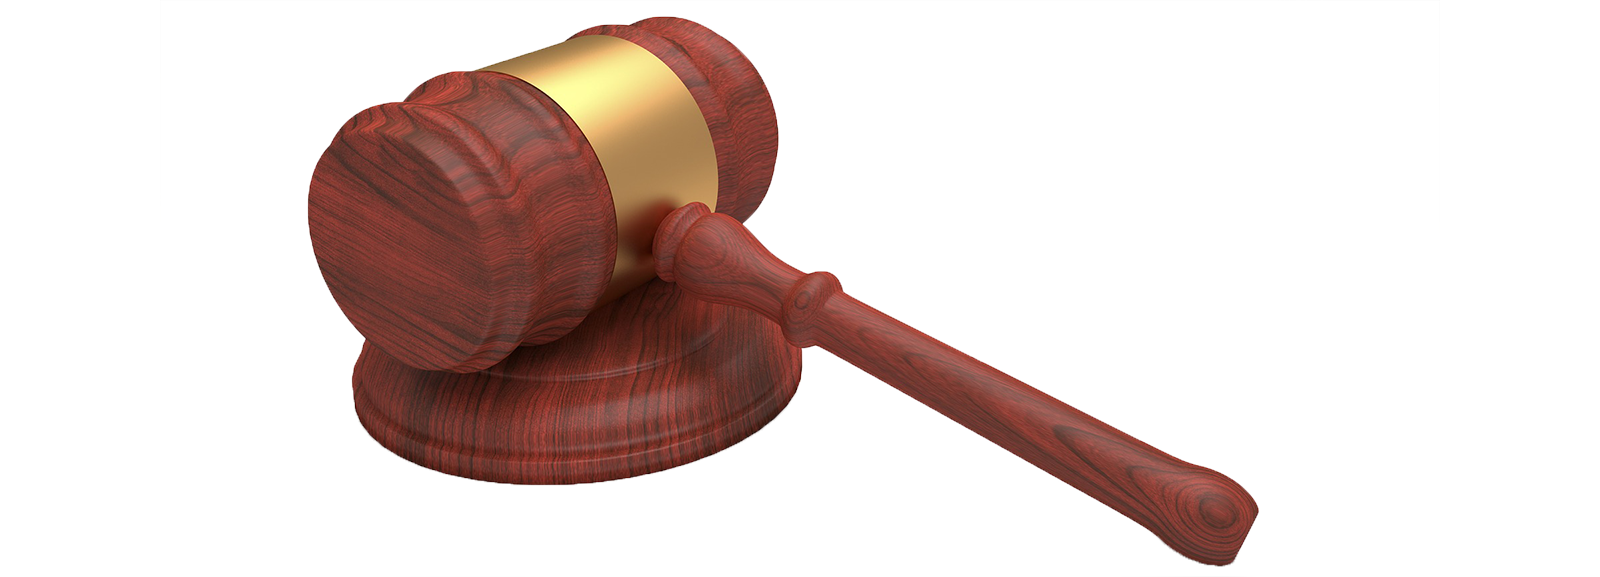 gavel clipart lawyer